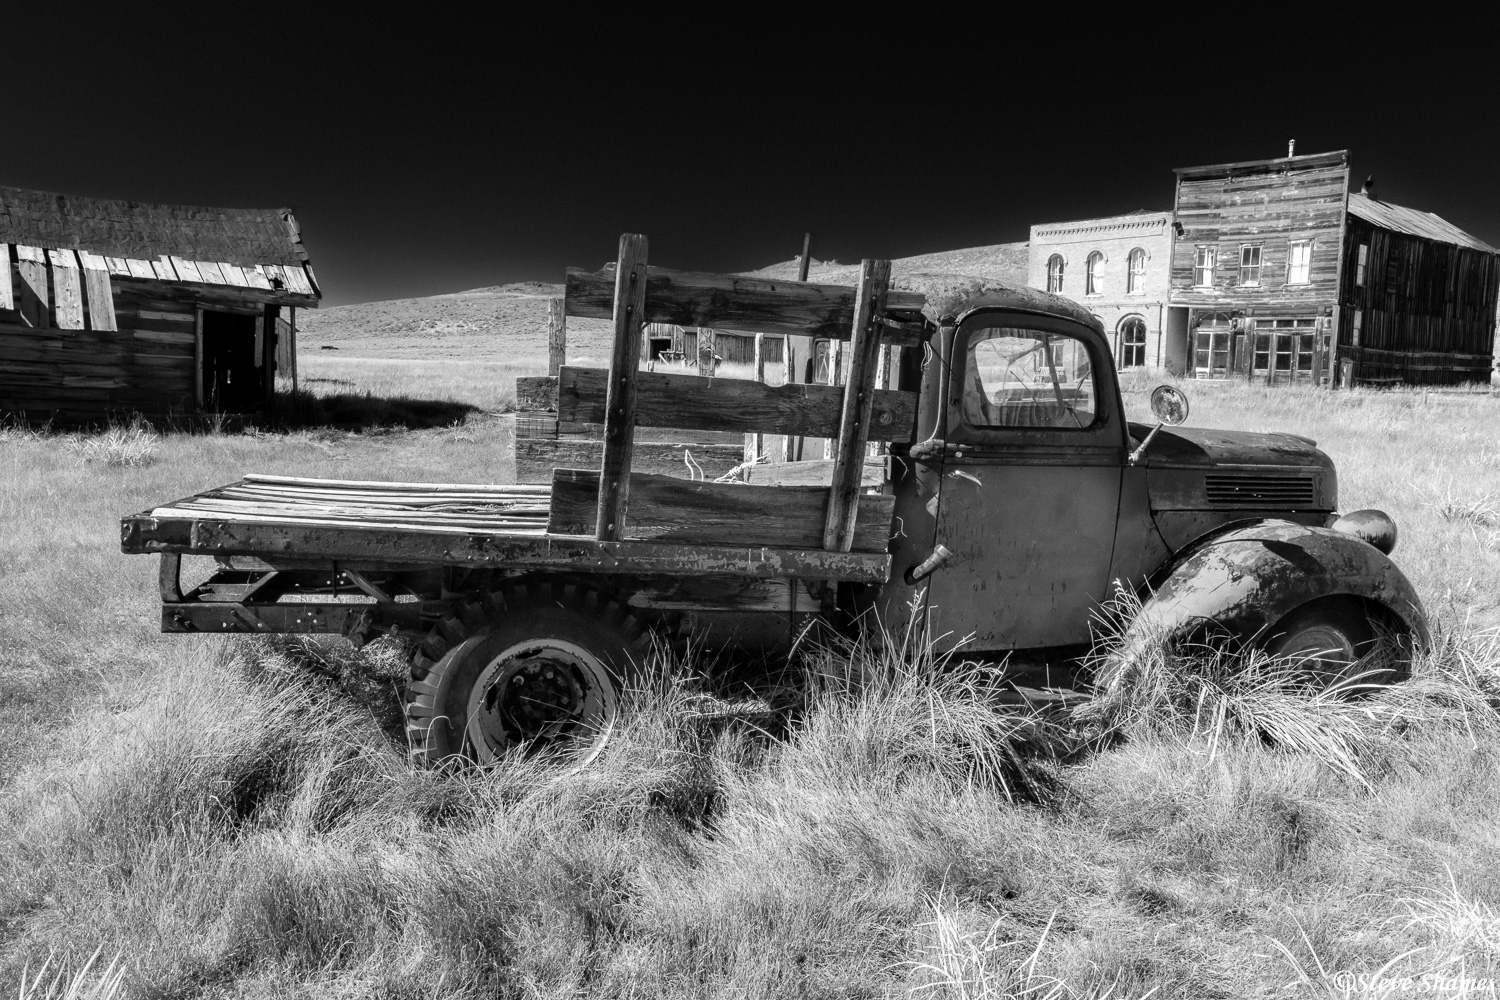 An old rotting truck in Bodie.